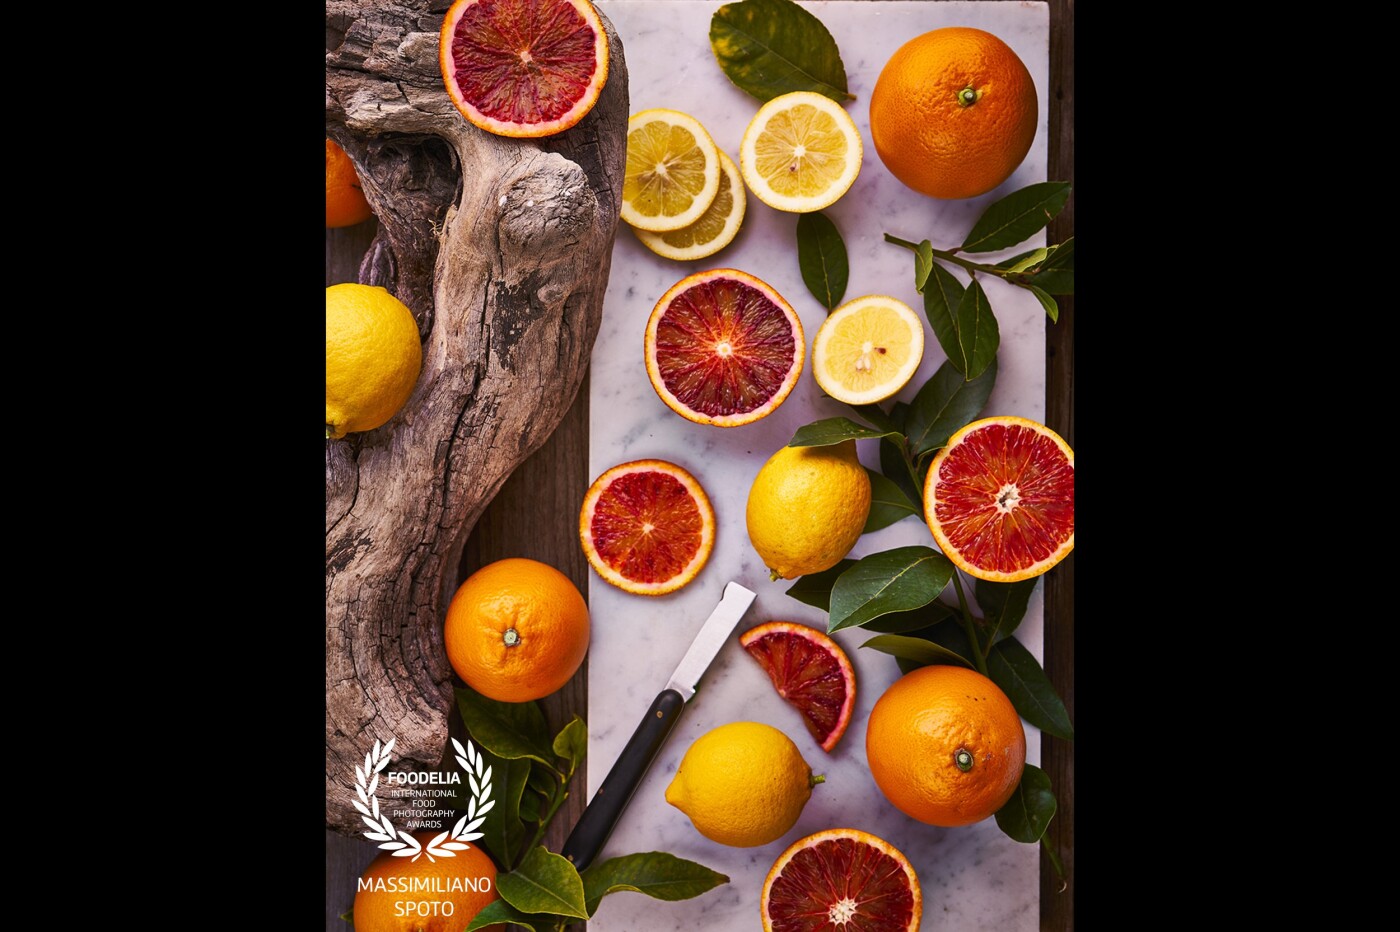 Selection of Sicilian citrus fruit (Blood oranges & lemons).<br />
Camera: Sony Alpha A7RII<br />
Lens: Sony 50 mm macro<br />
Flash: Elinchrom with a softbox<br />
Settings: ISO 64, 1/125 sec at f/11 with a tripod<br />
Shot in my studio